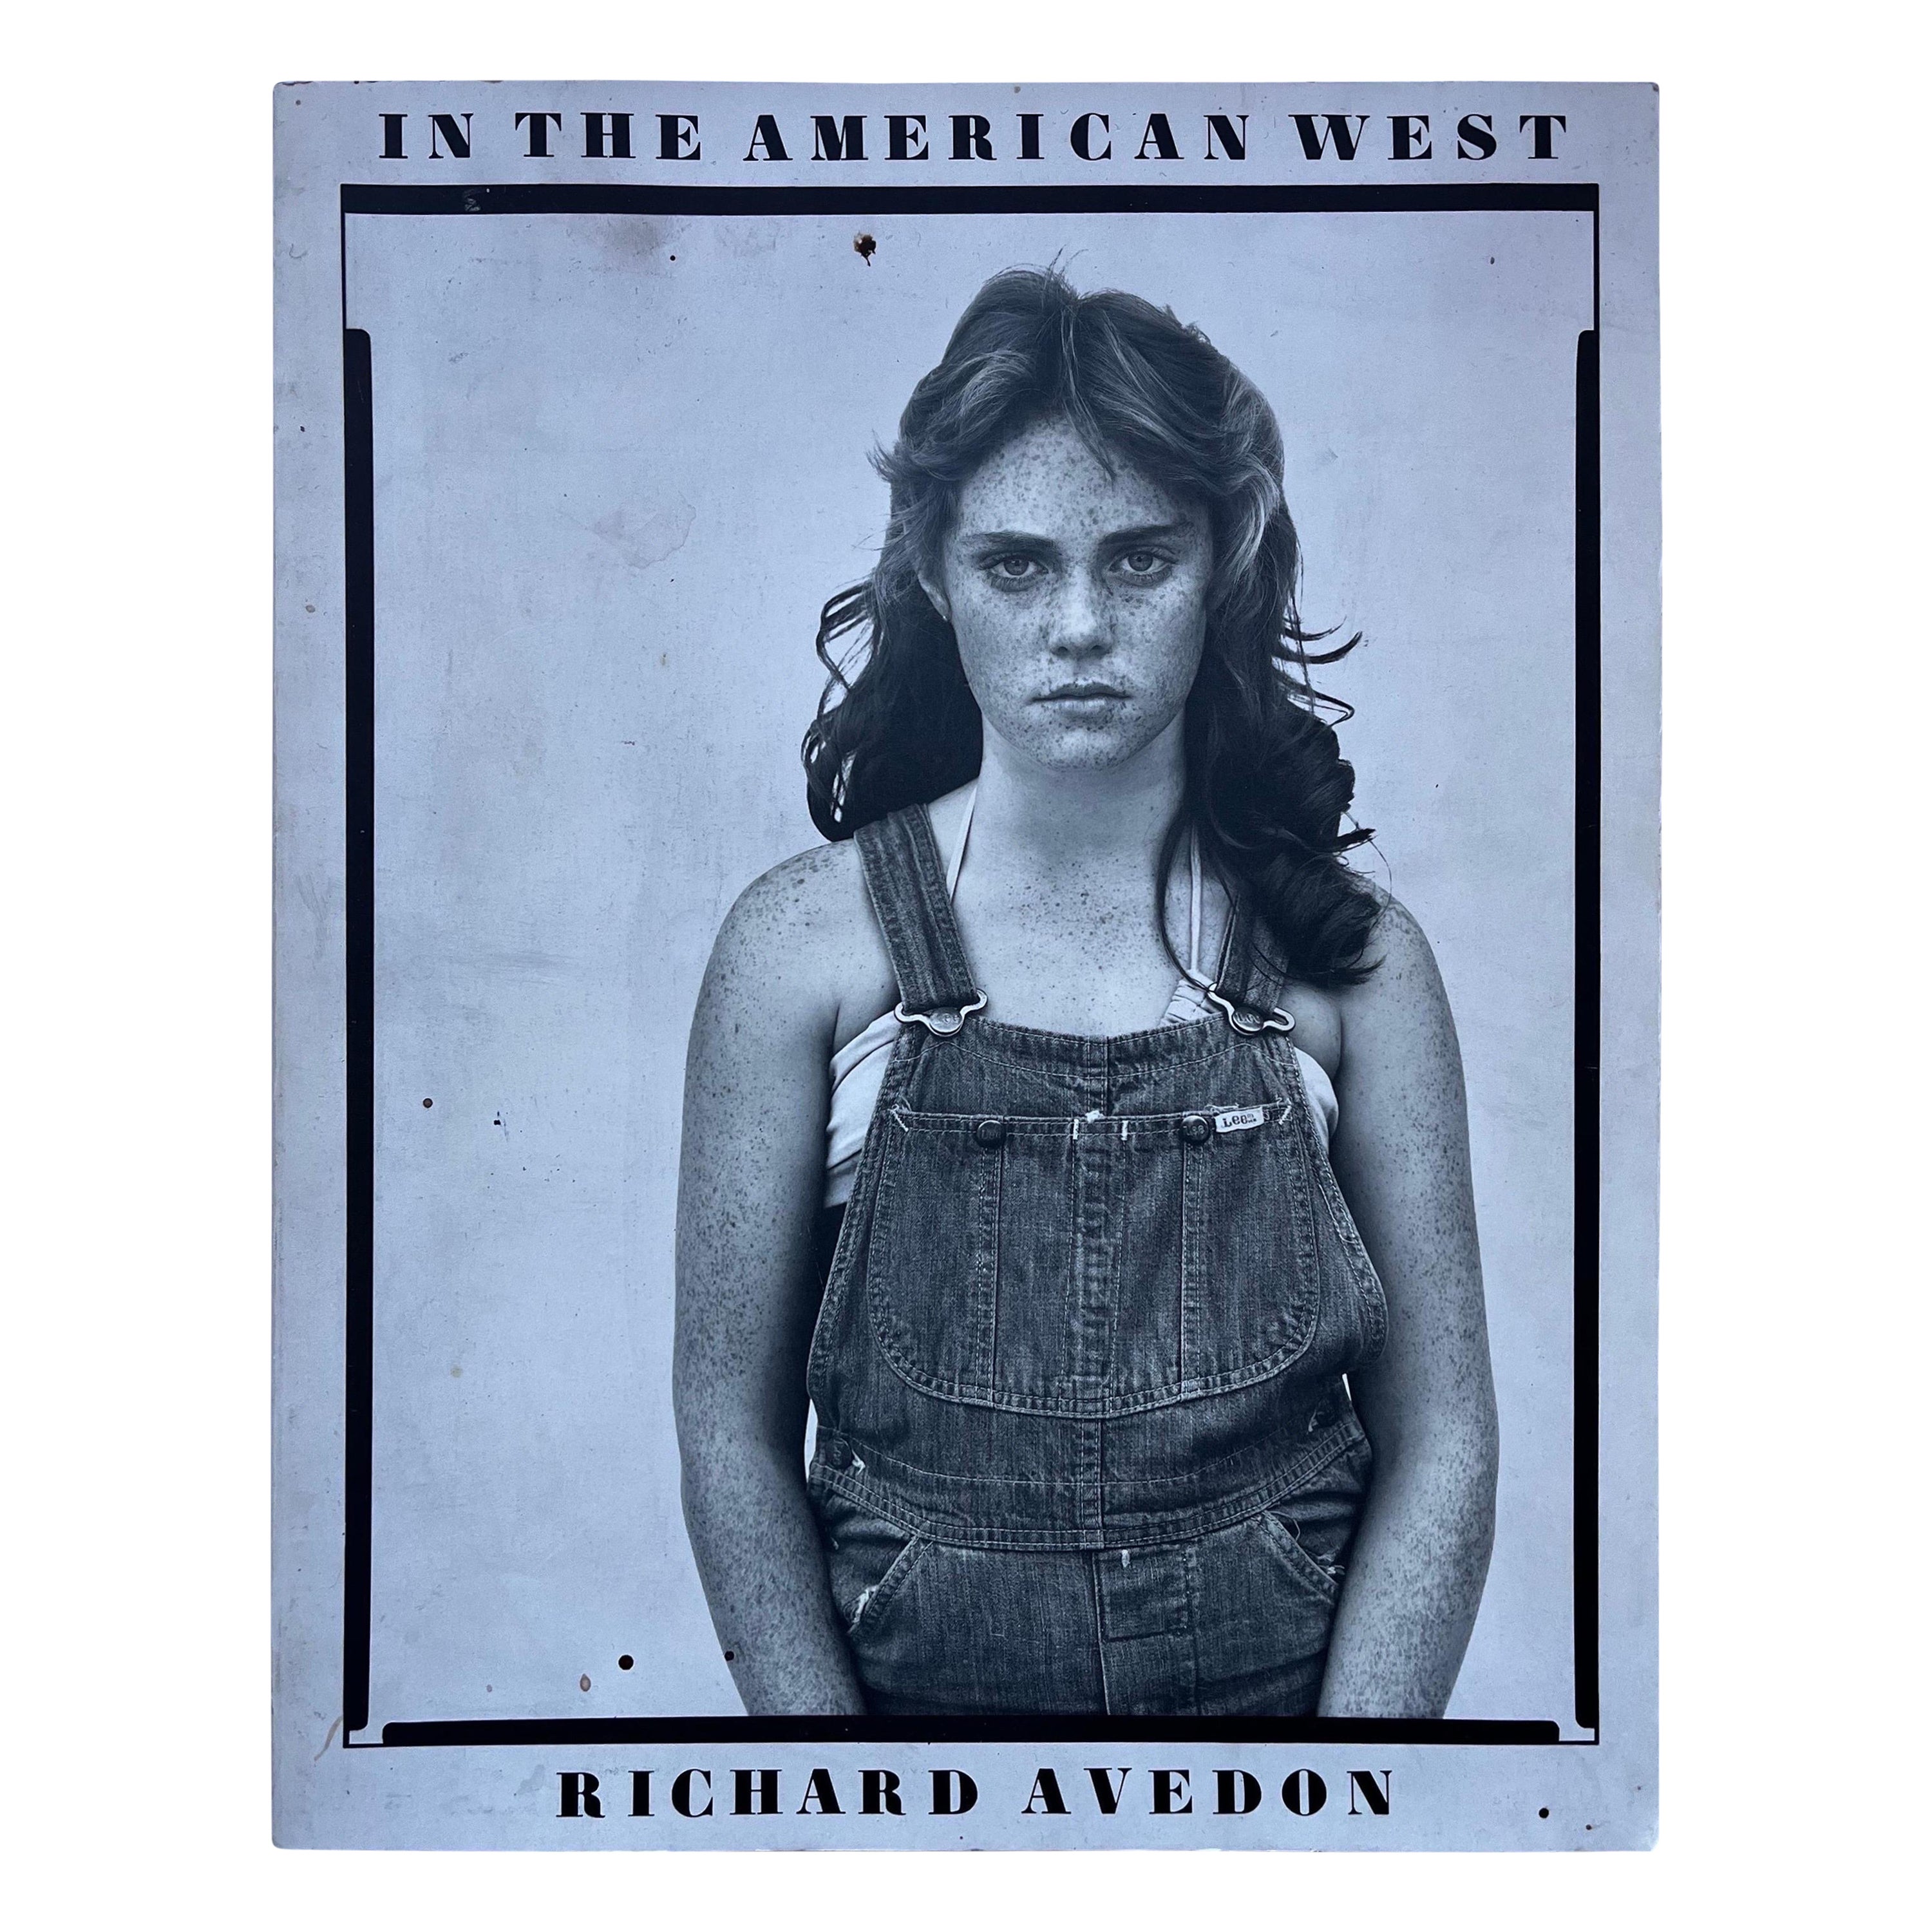 « In the American West », Richard Avendon, 1985, signé